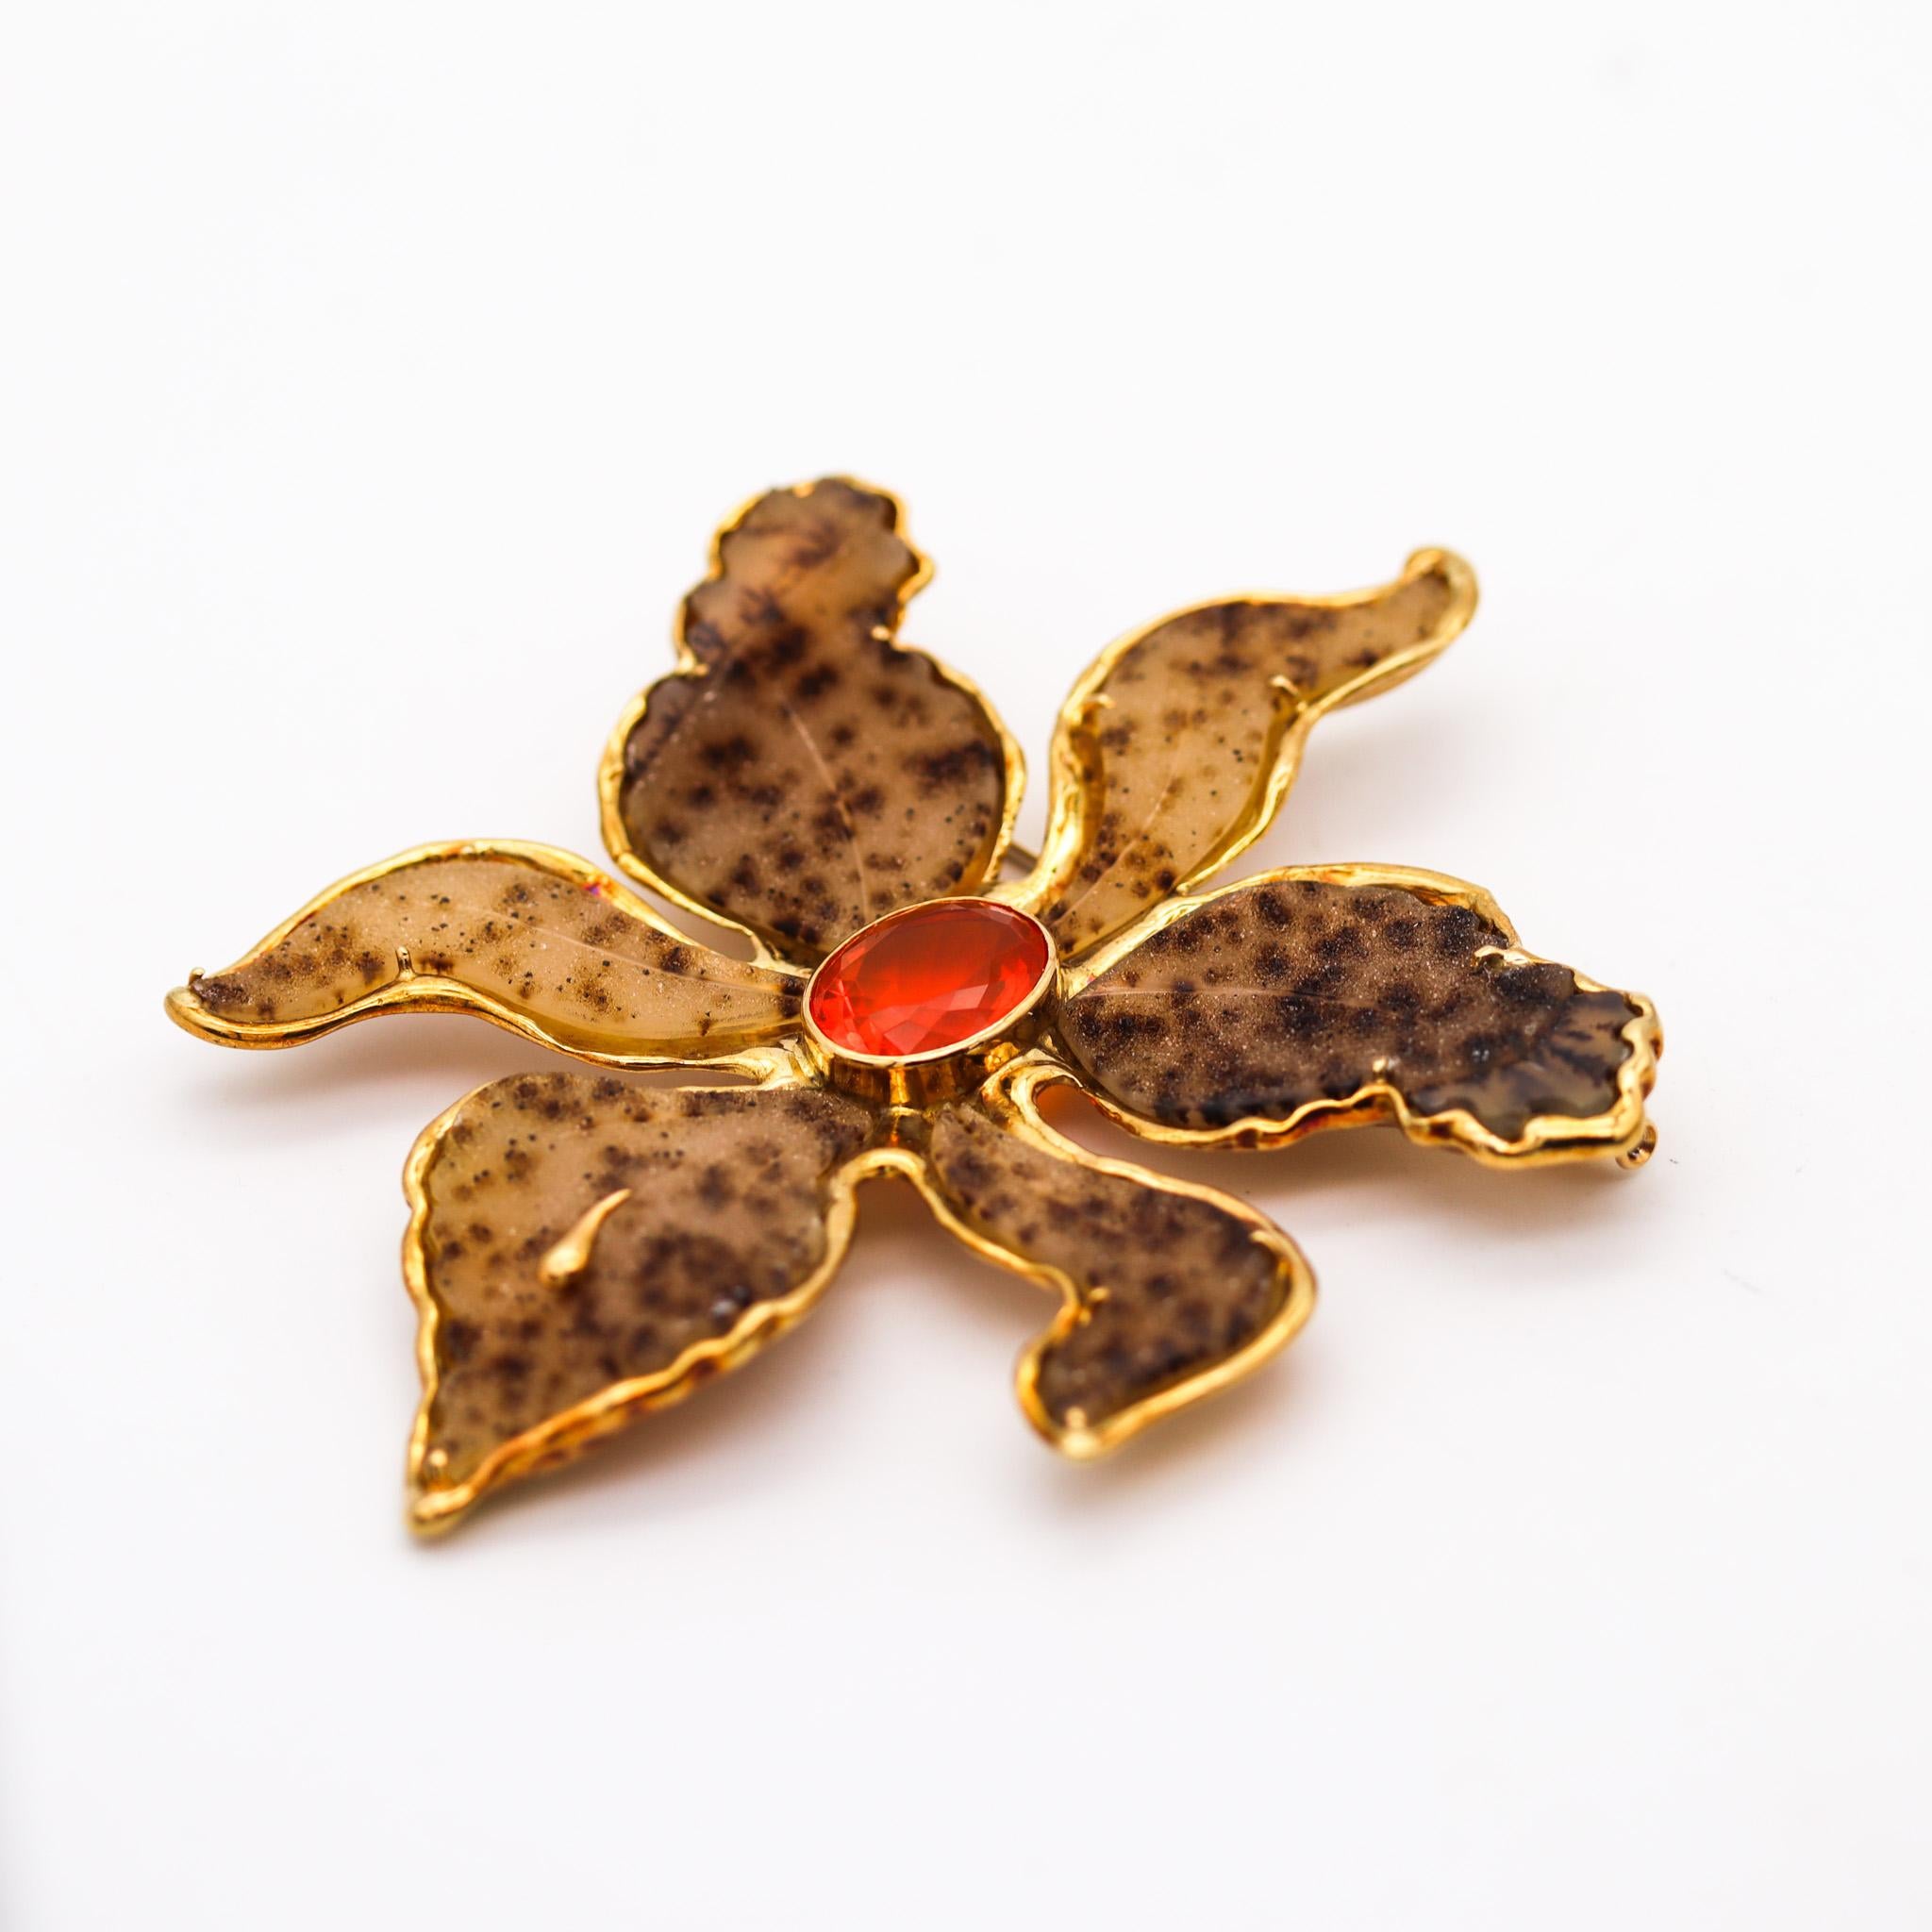 Orchid flower pendant-brooch designed by Elizabeth Gage.

Exceptional pendant-brooch, created in London by the British jewelry designer Elizabeth Gage, back in the 1990. This piece of jewelry is magnificent and has been carefully crafted in the